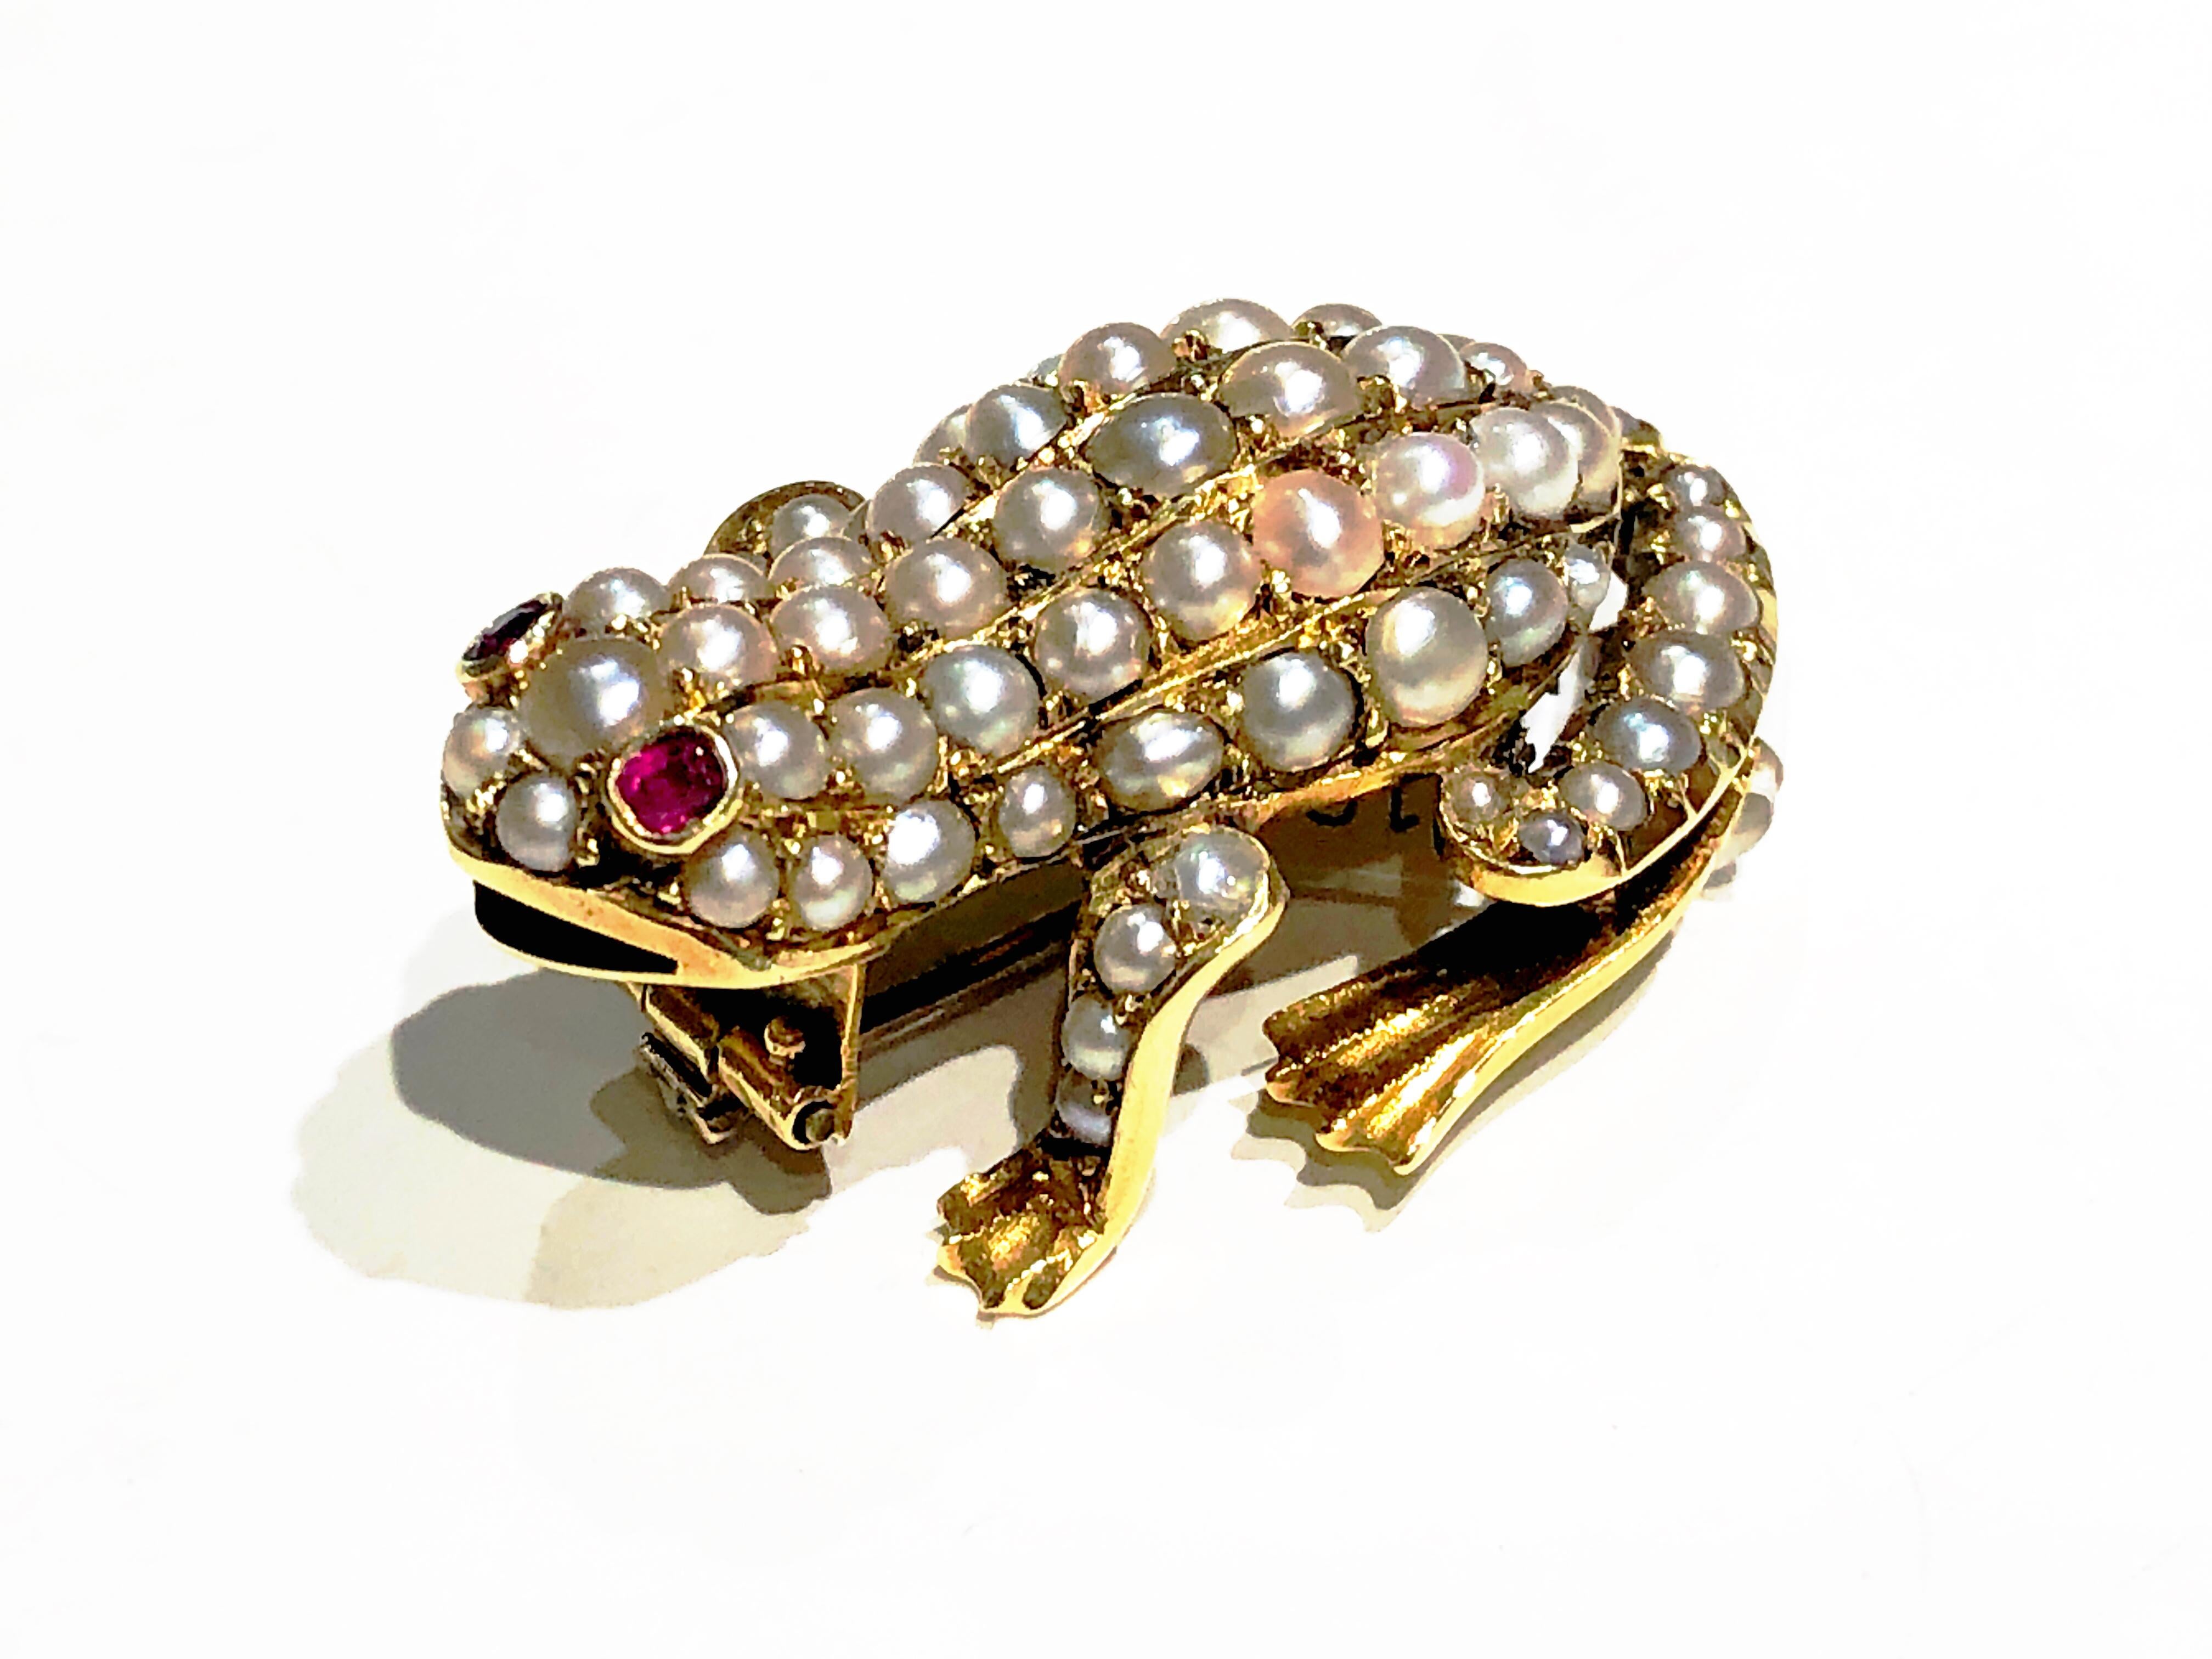 Antique Gold, Pearl and Ruby Frog Brooch, Circa 1900 In Good Condition For Sale In London, GB